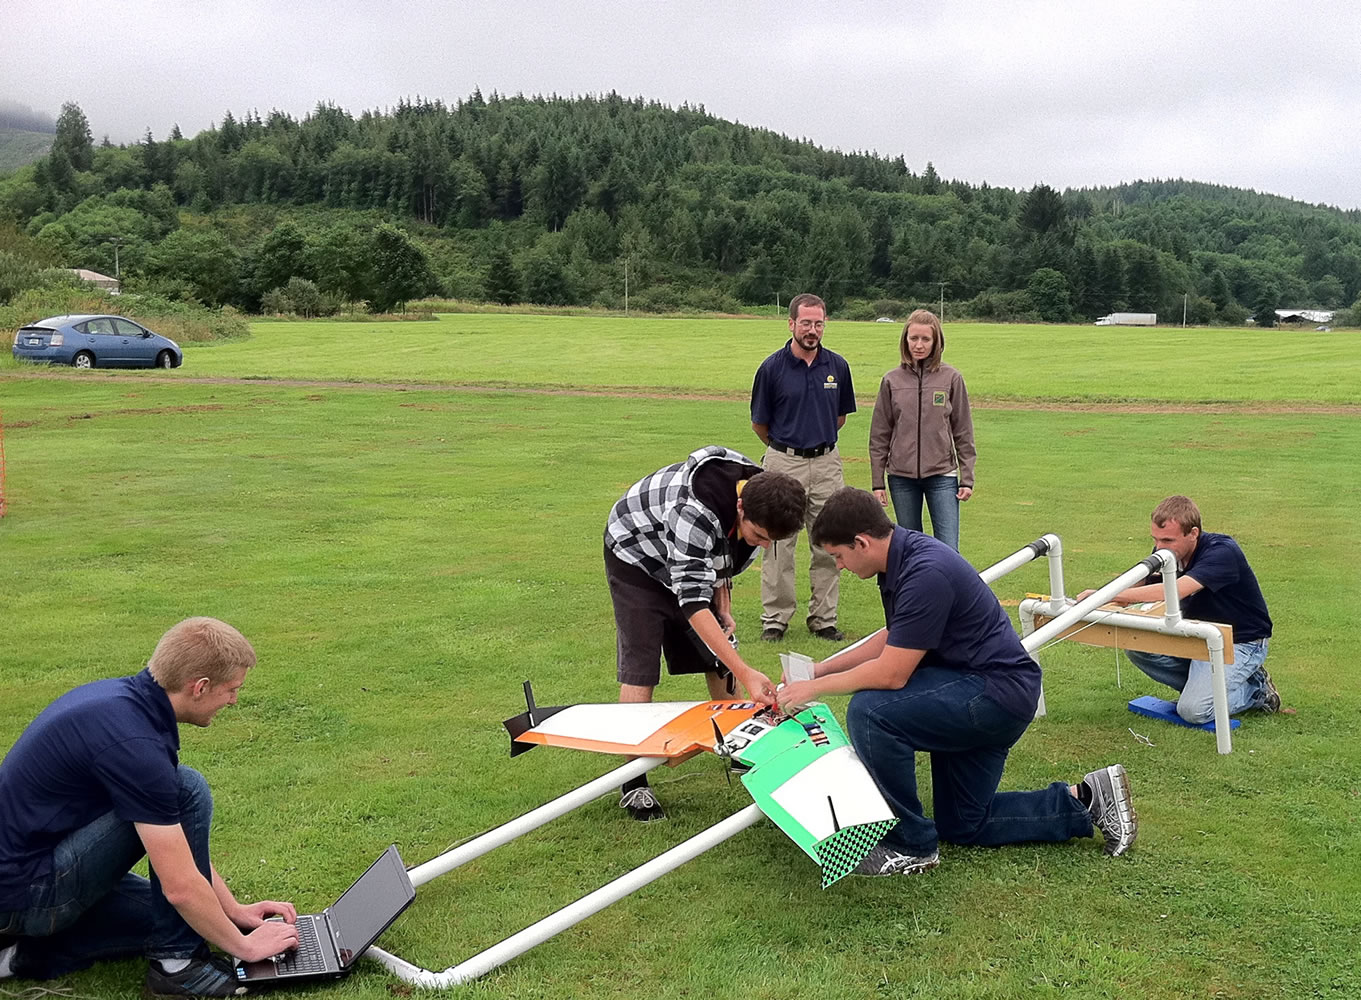 Embry-Riddle Aeronautical University
Students demonstrate the launch catapult for their drone aircraft Thursday near Tillamook, Ore. They had hoped to test the drone's ability to take aerial photographs of cormorants nesting on an offshore rock, but had to scrub the flights for lack of a permit. The Oregon Department of Fish and Wildlife hopes to get the permit in time for nesting season next year.